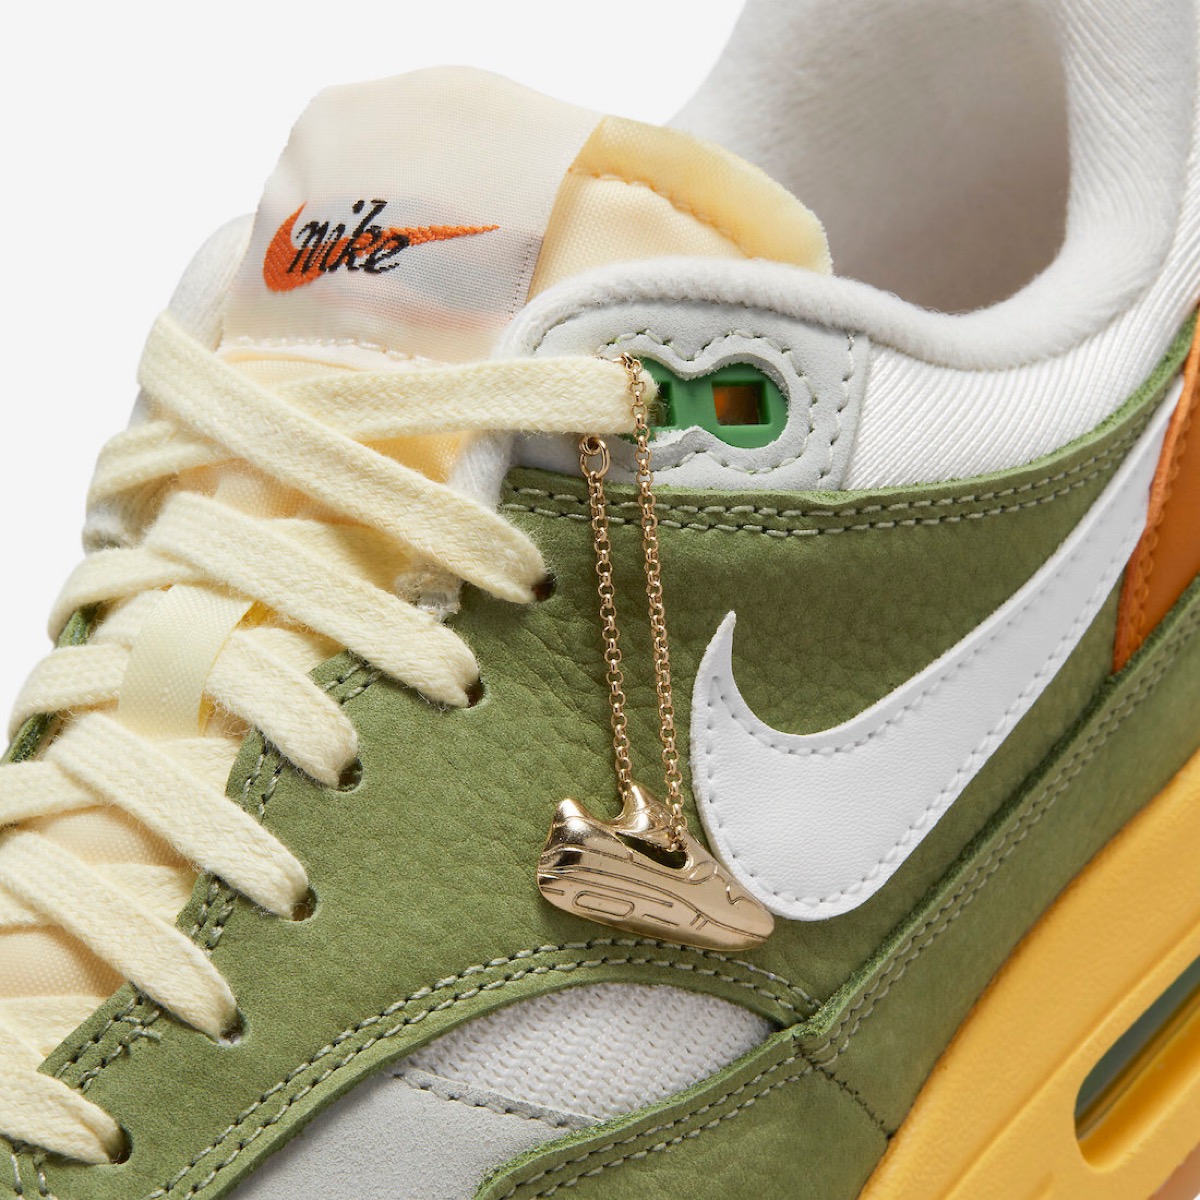 Design by Japanで誕生したNike Wmns Air Max 1 PRM “Think Tank”が